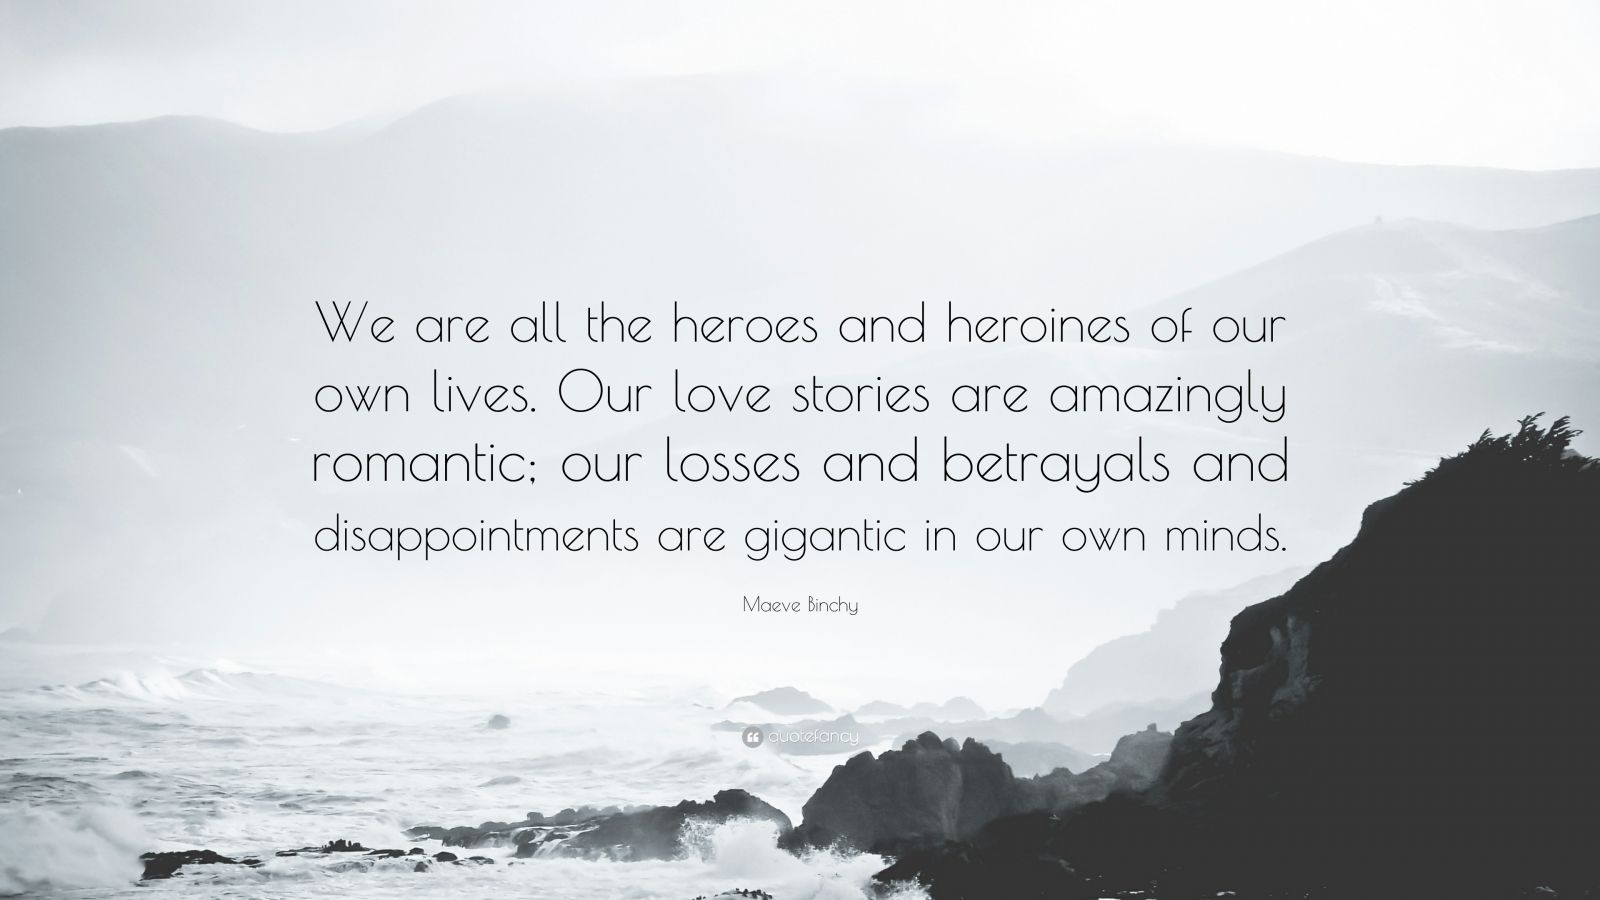 Maeve Binchy Quote: “We are all the heroes and heroines of our own lives. Our  love stories are amazingly romantic; our losses and betrayals a”